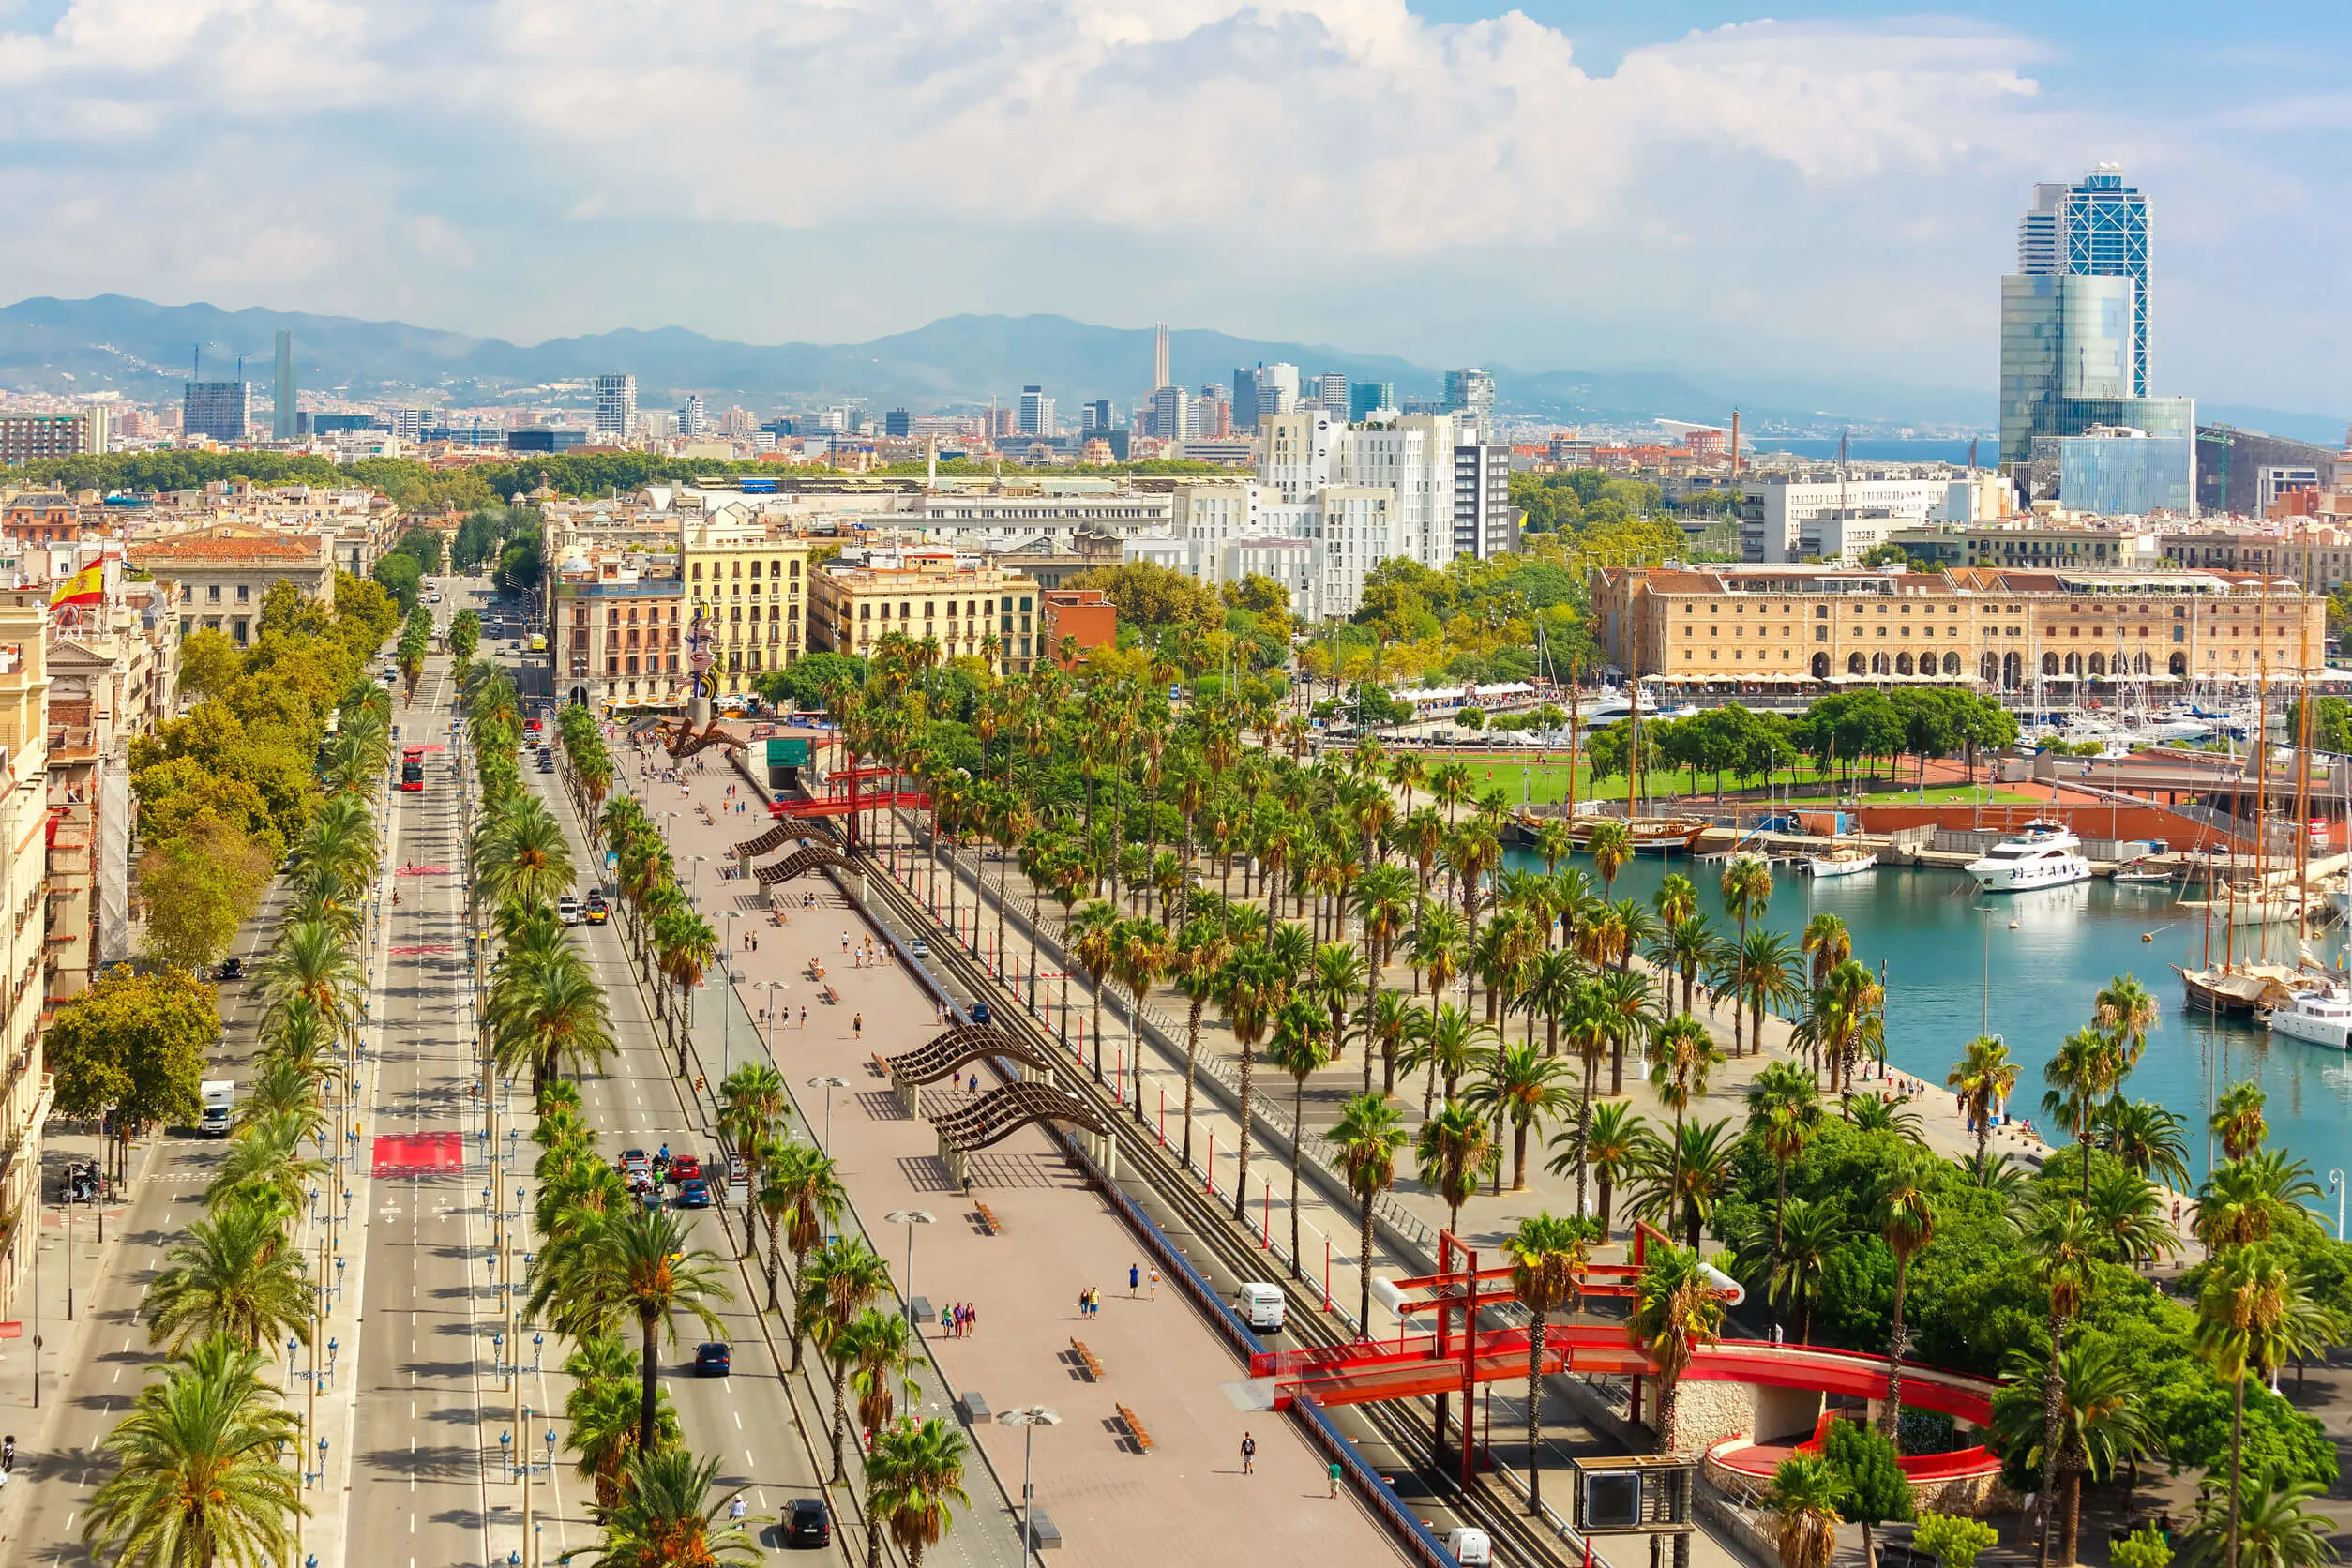 Aerial view over Passeig de Colom or Columbus avenue, La Barceloneta and Port Vell marina from Christopher Columbus monument in Barcelona, Catalonia, Spain